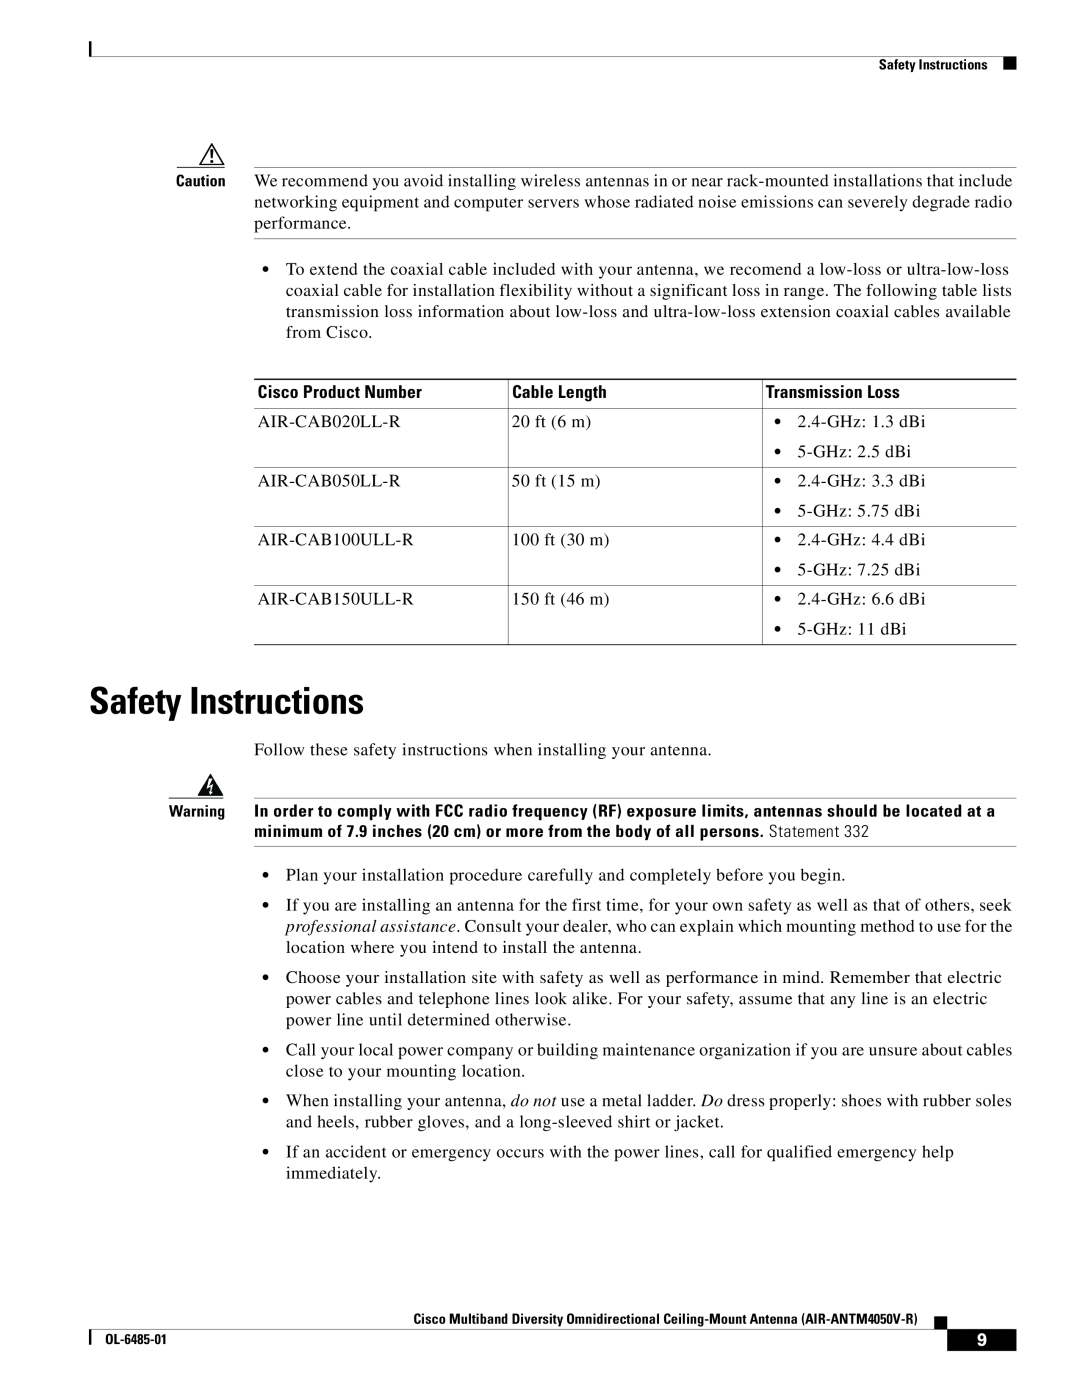 Cisco Systems AIR-ANTM4050V-R warranty Safety Instructions, Cisco Product Number, Cable Length, Transmission Loss 